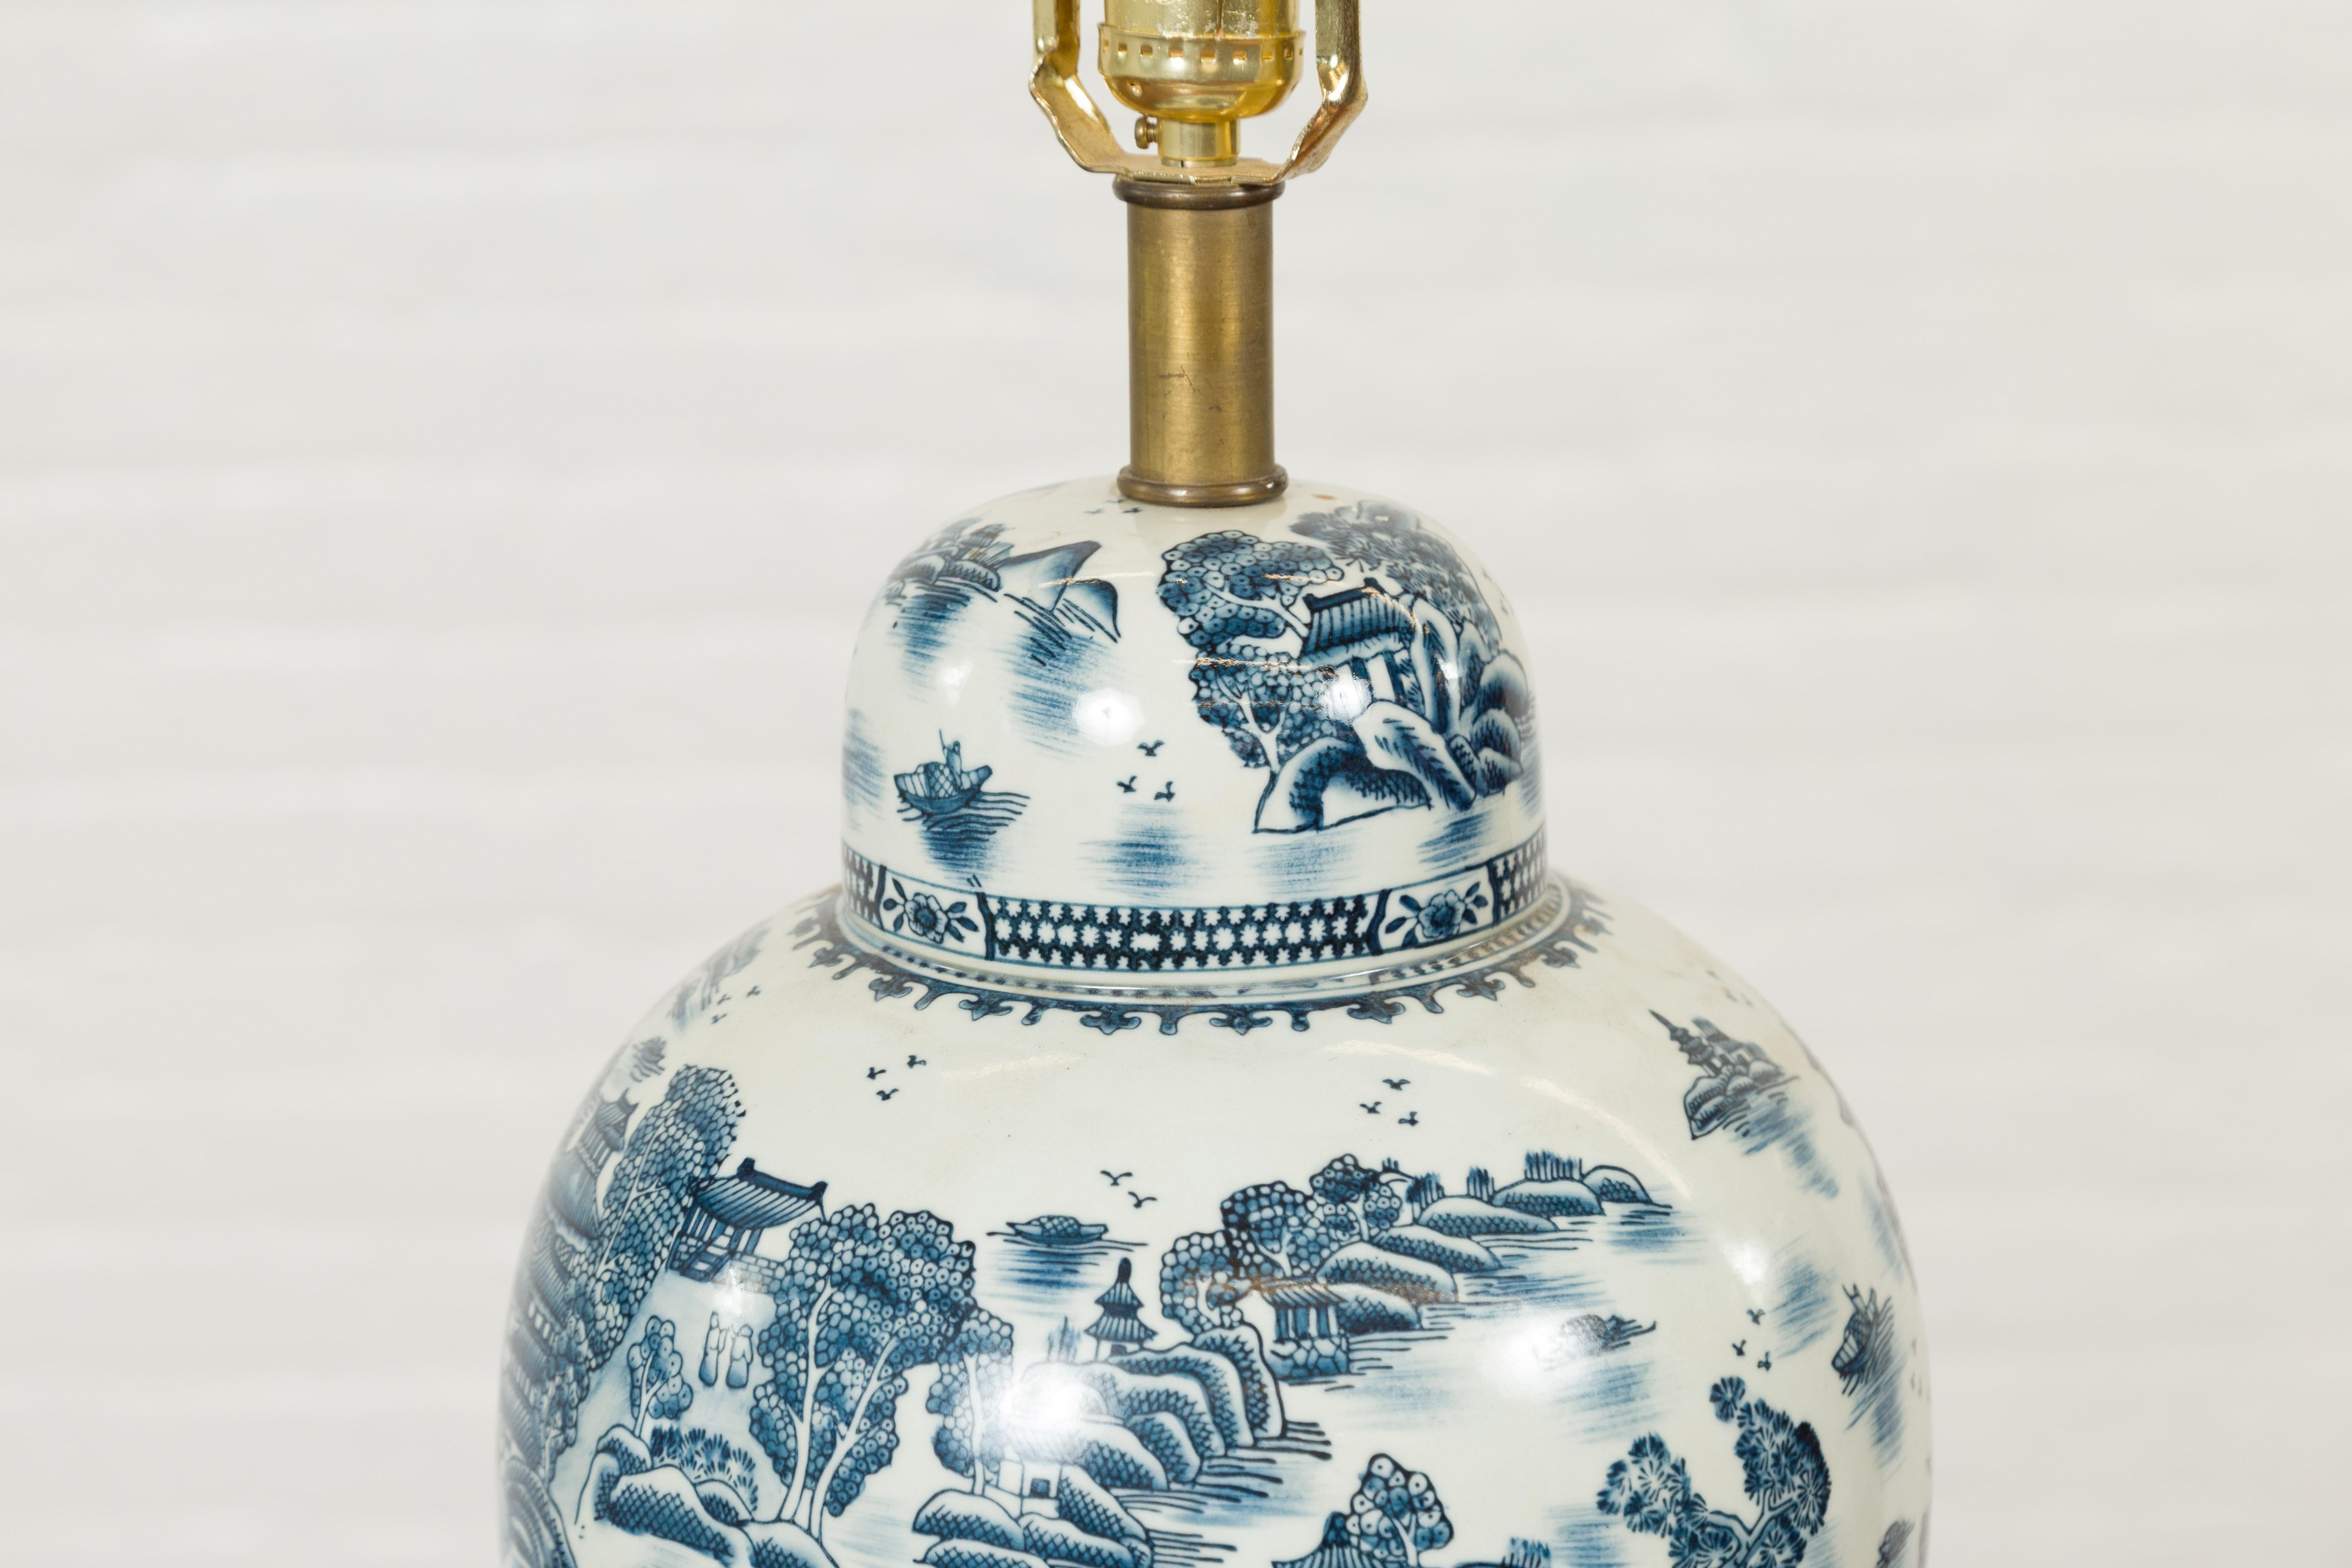 Vintage Chinese Blue and white Porcelain Lamp with Architectures and Landscapes For Sale 5